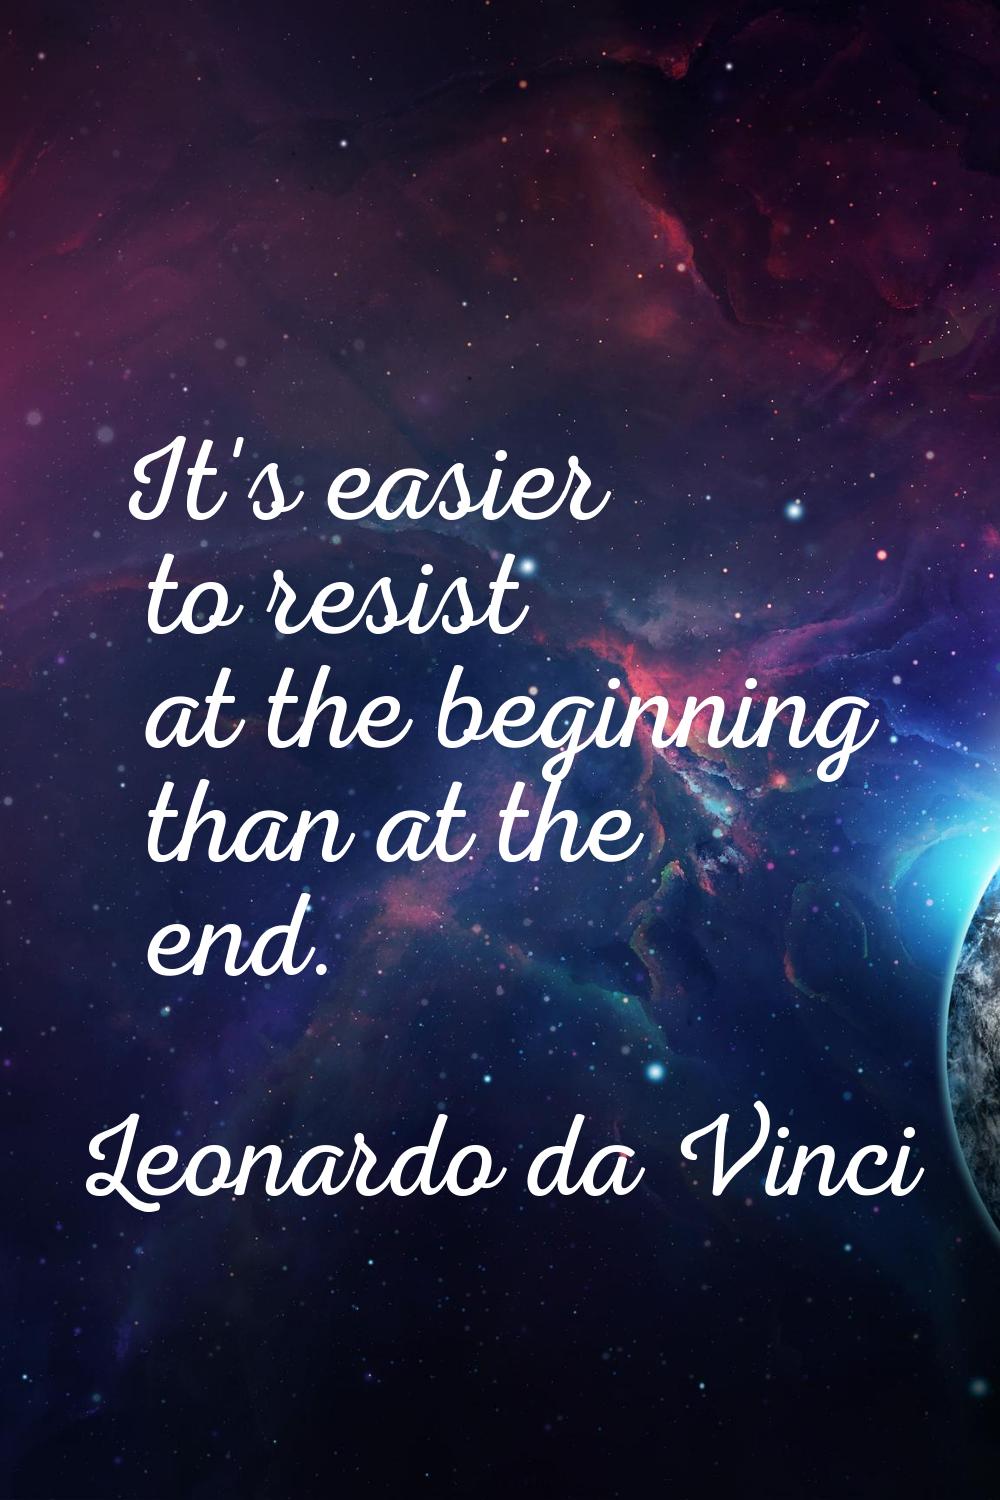 It's easier to resist at the beginning than at the end.